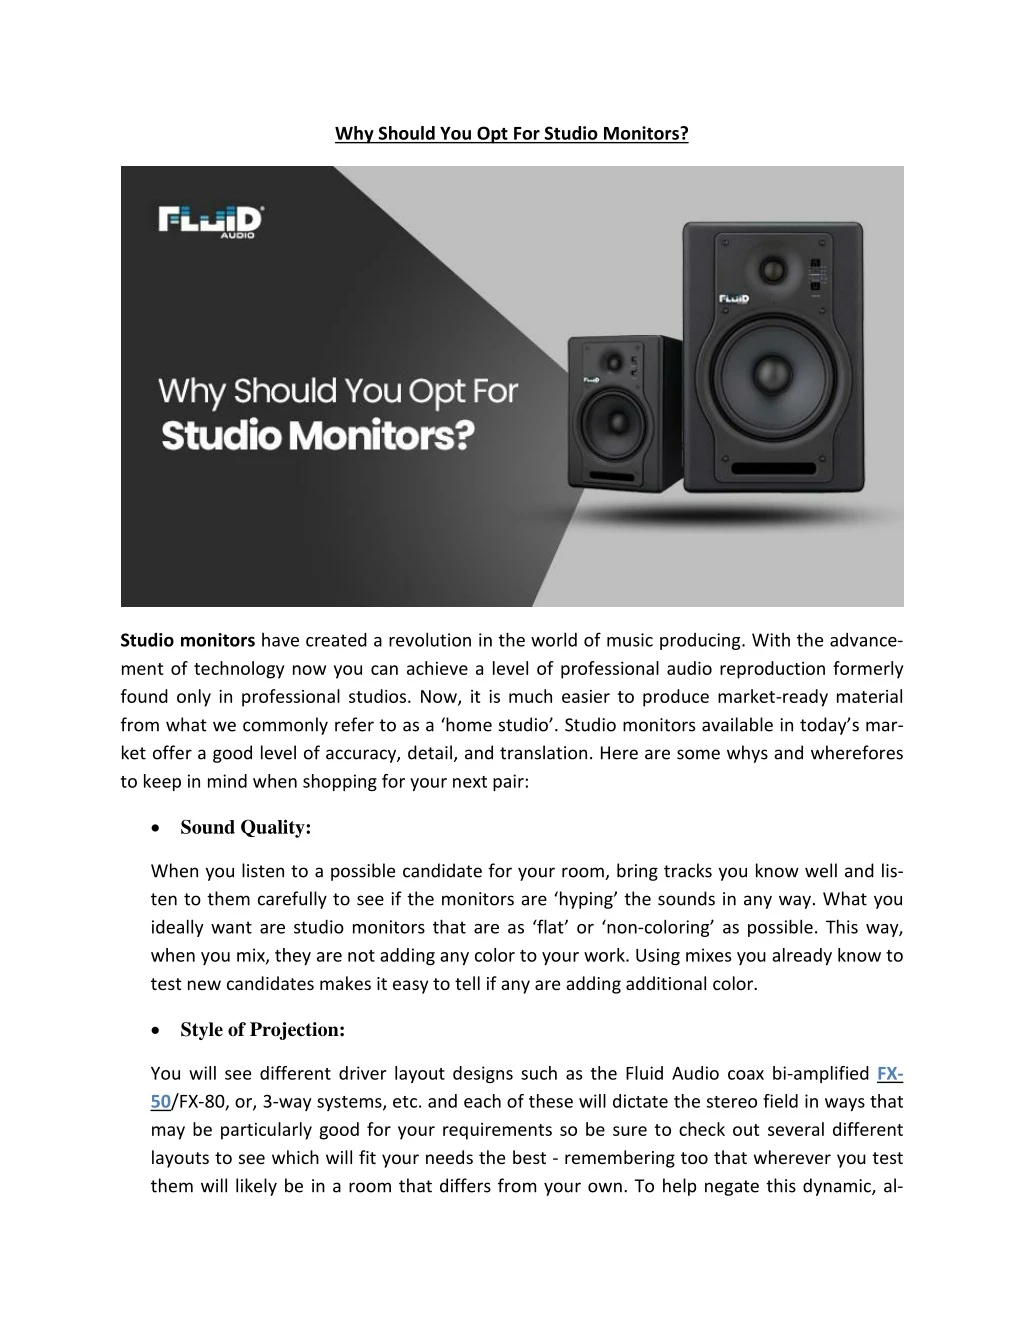 why should you opt for studio monitors